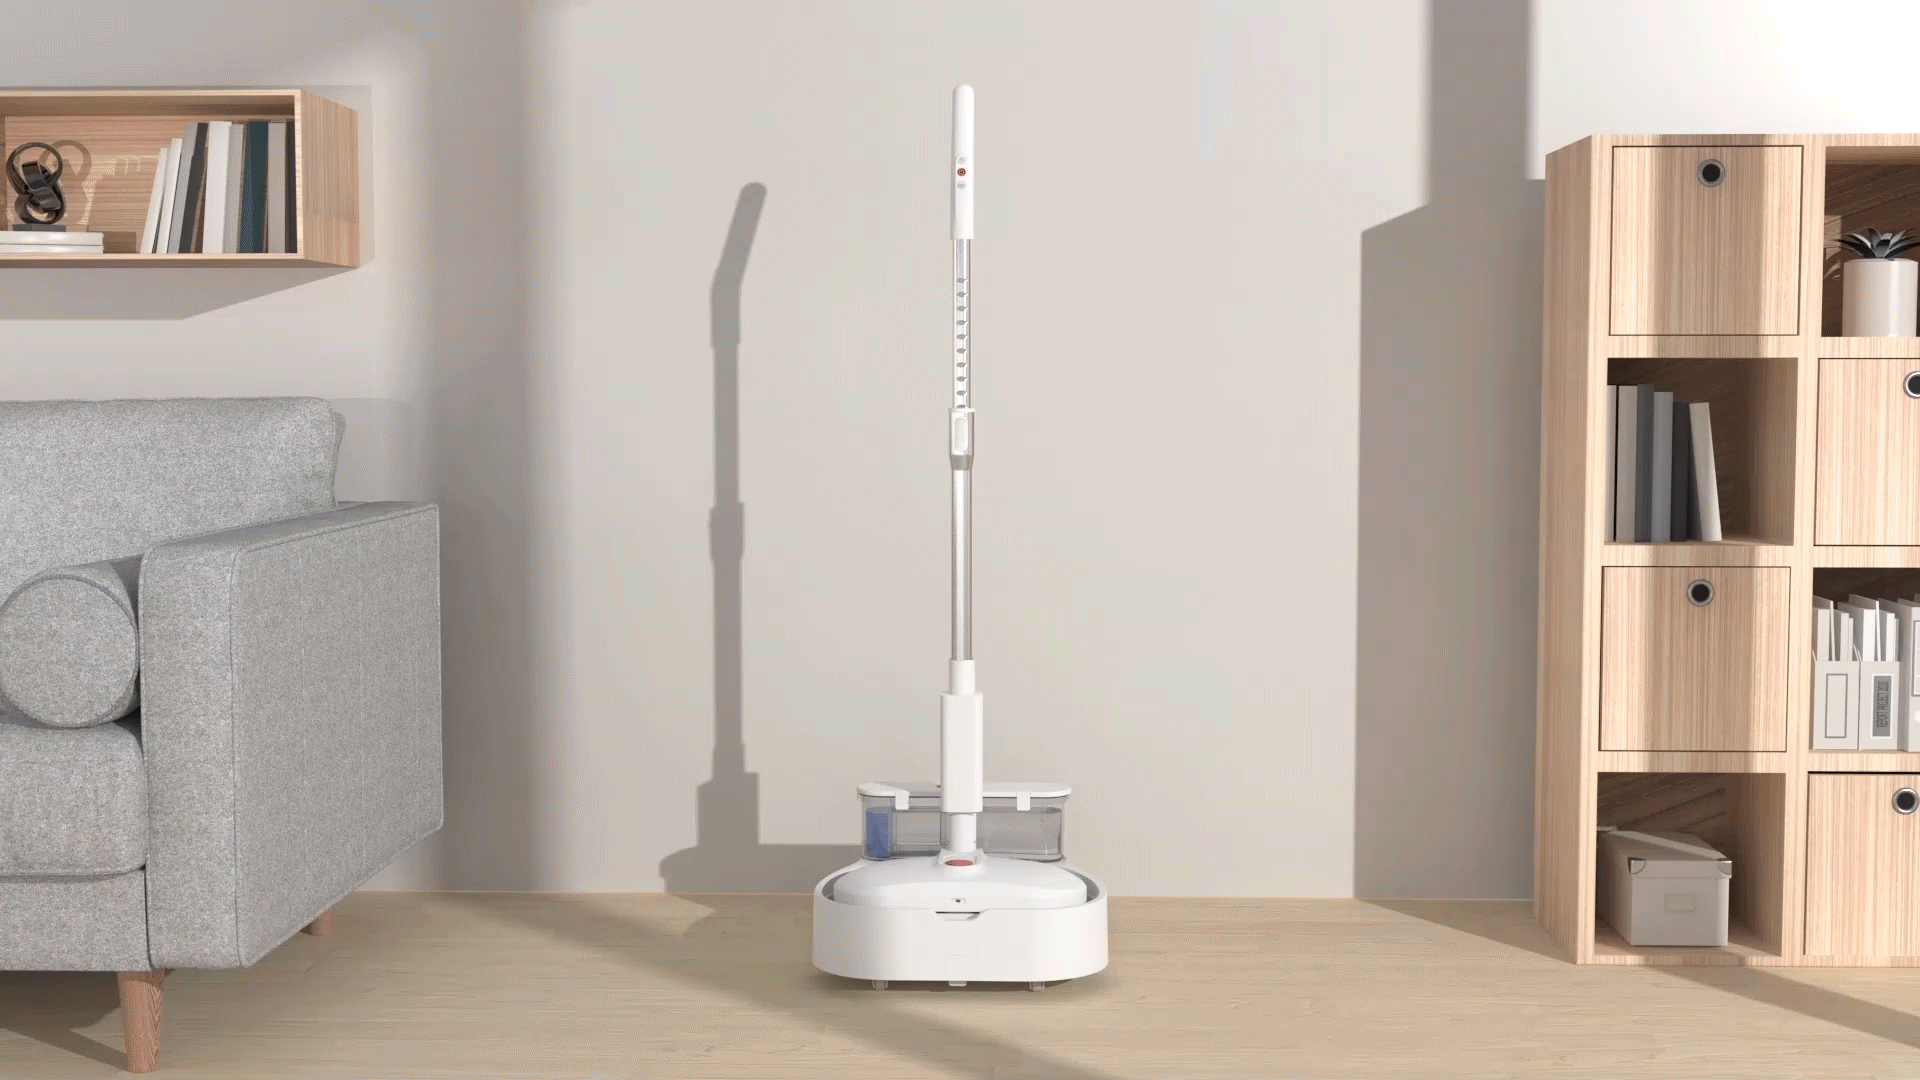 Duspin5 pro Cordless Spin Mop Cleaner Product Film 3D 합성 연출 gif